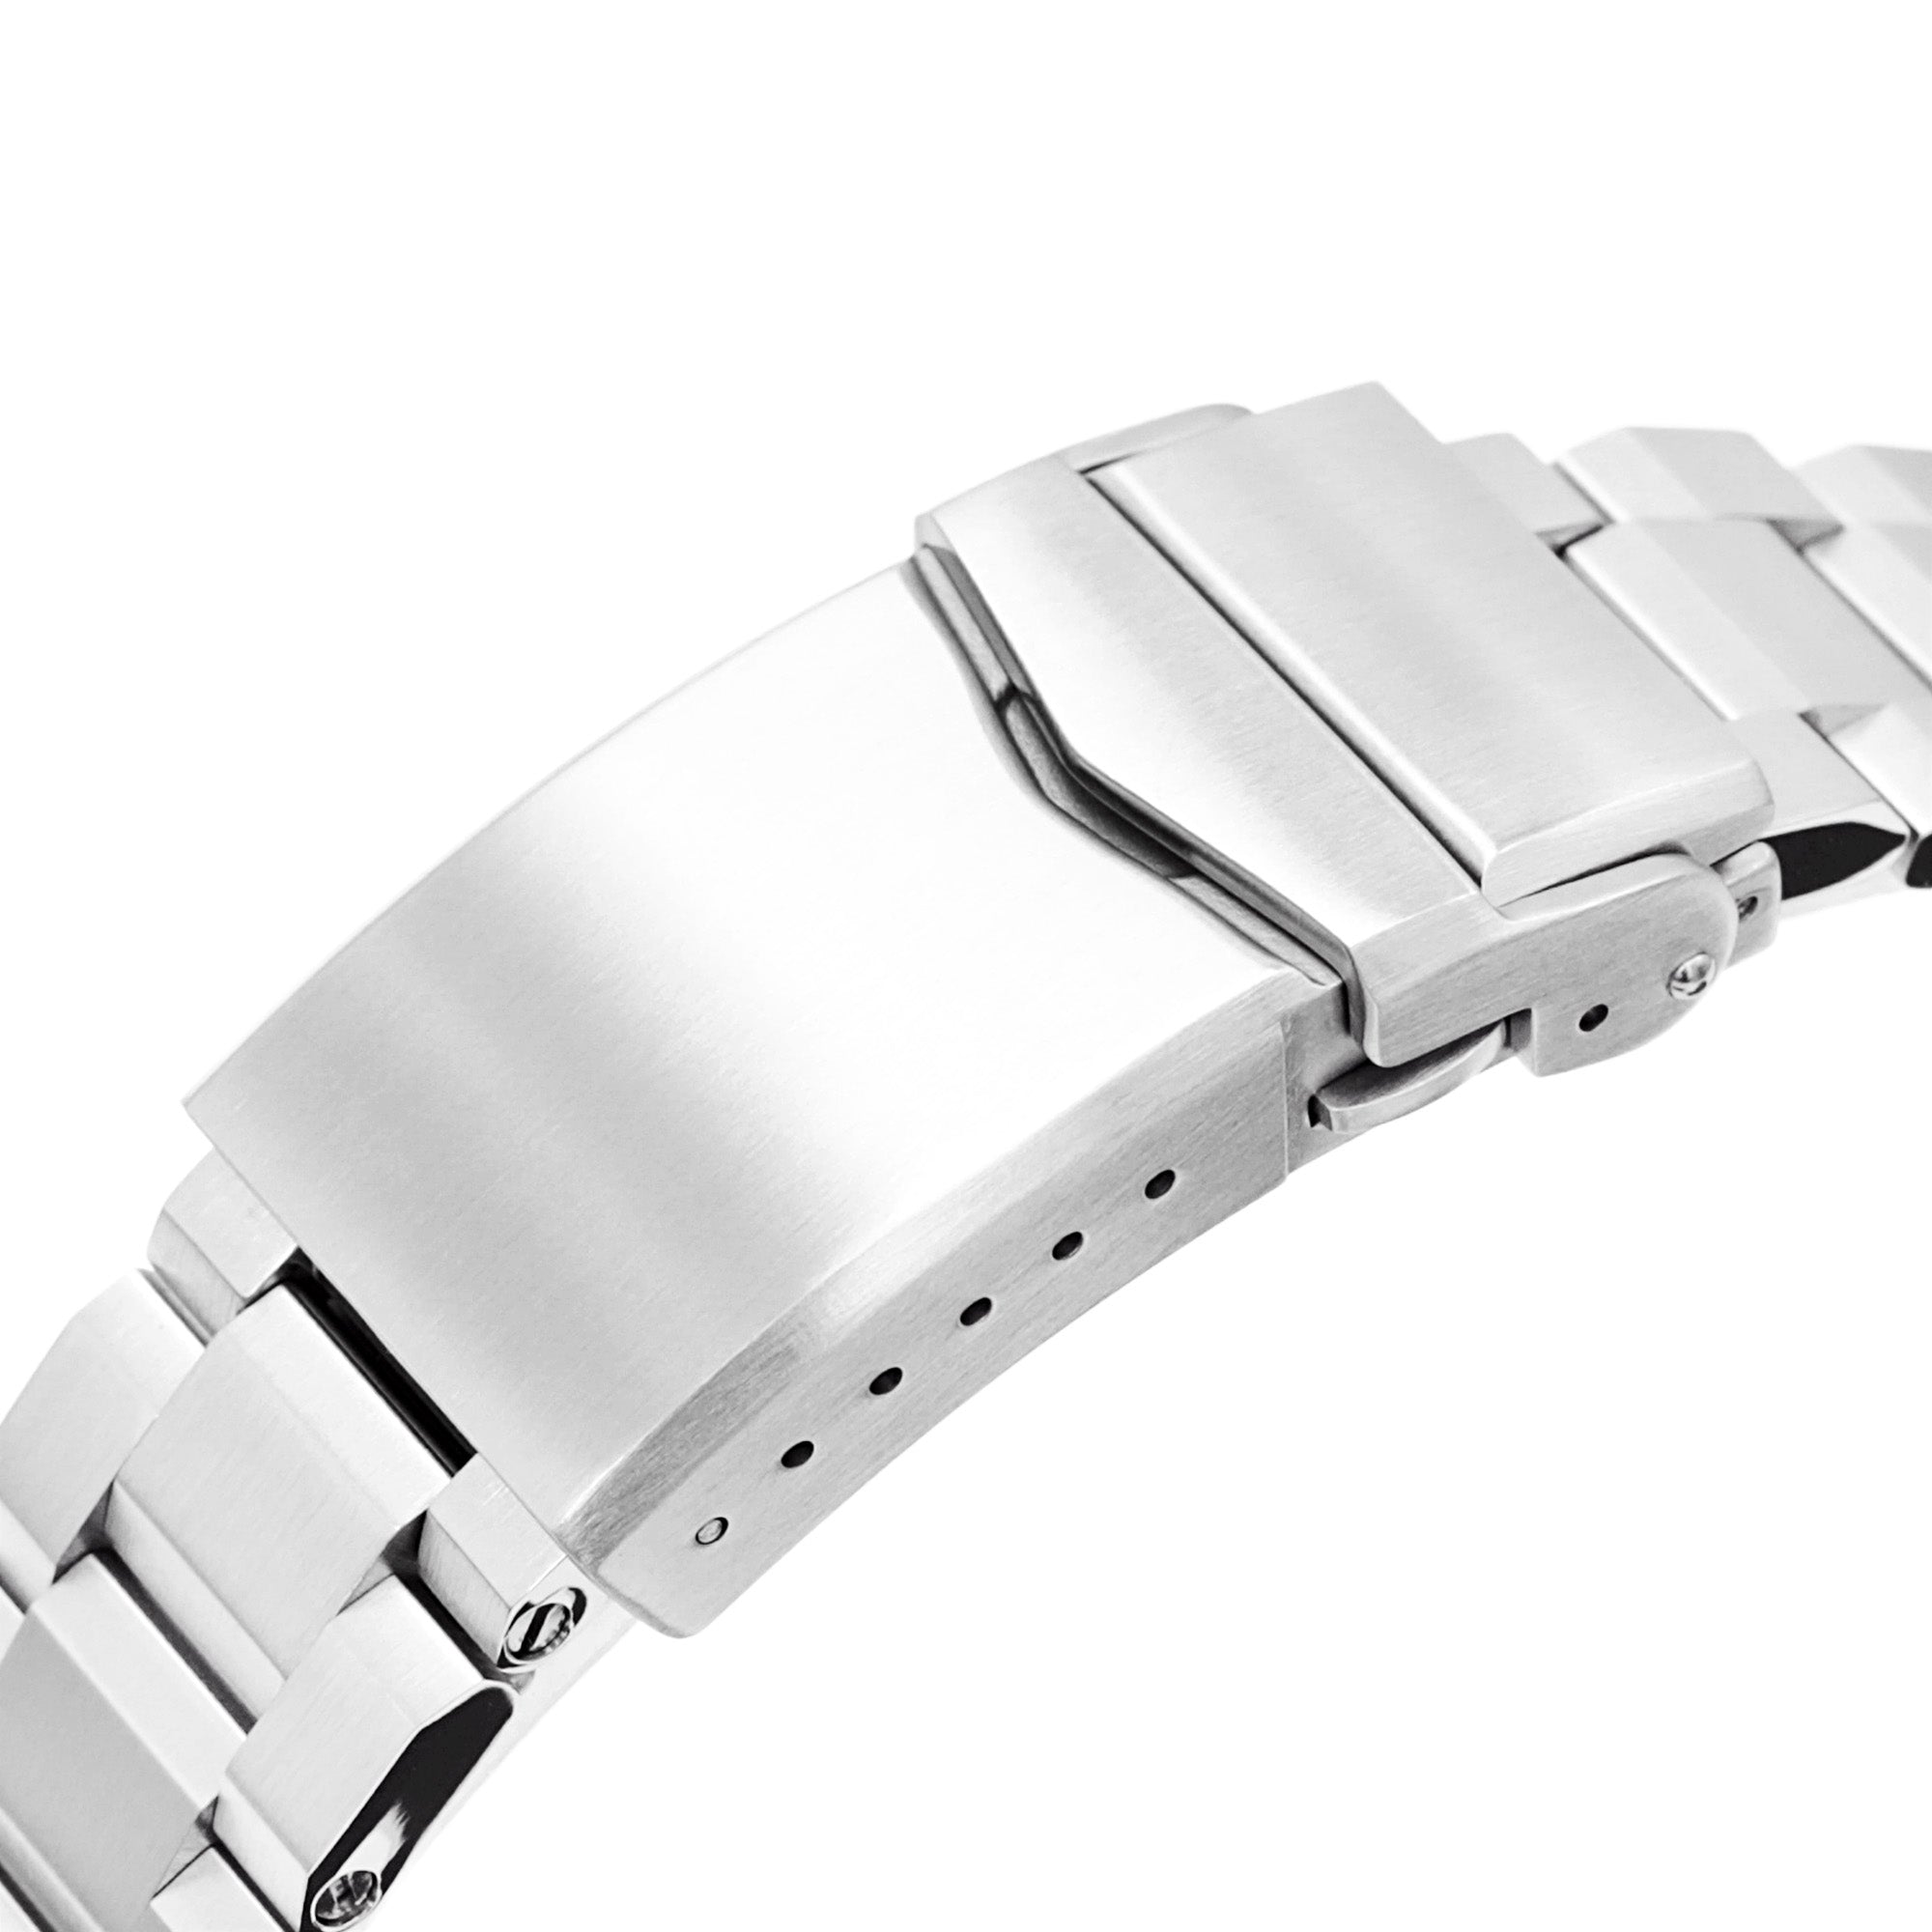 19mm Hexad III Watch Band for Grand Seiko 44GS SBGJ235, 316L Stainless Steel Brushed V-Clasp Strapcode Watch Bands